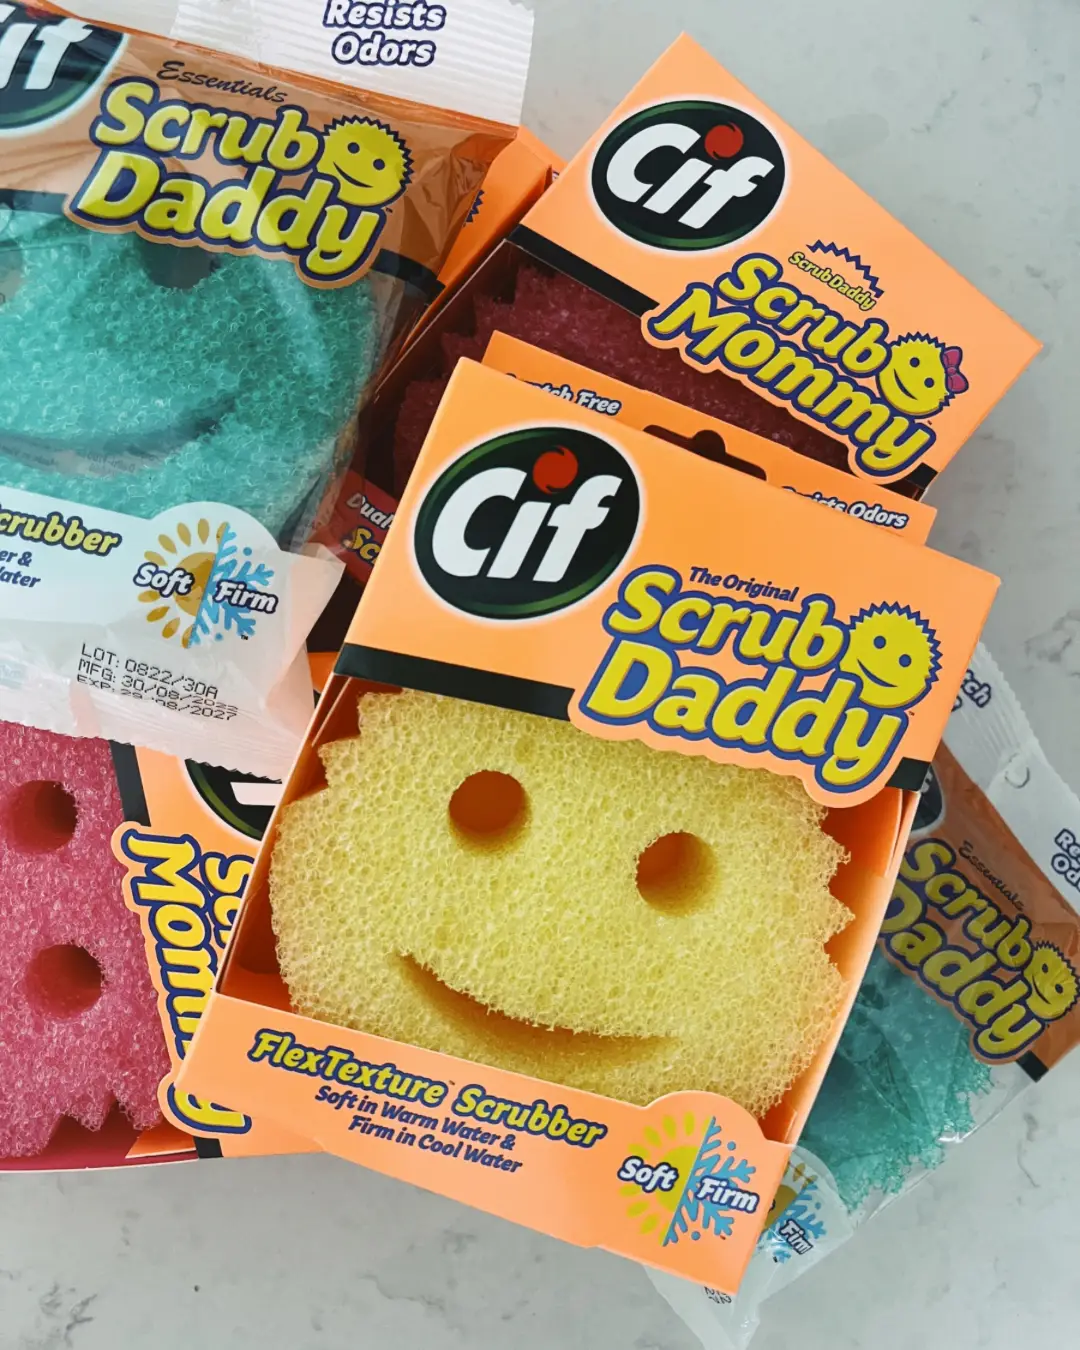 I'm a cleaning pro - I found the best Scrub Daddy trick to remove